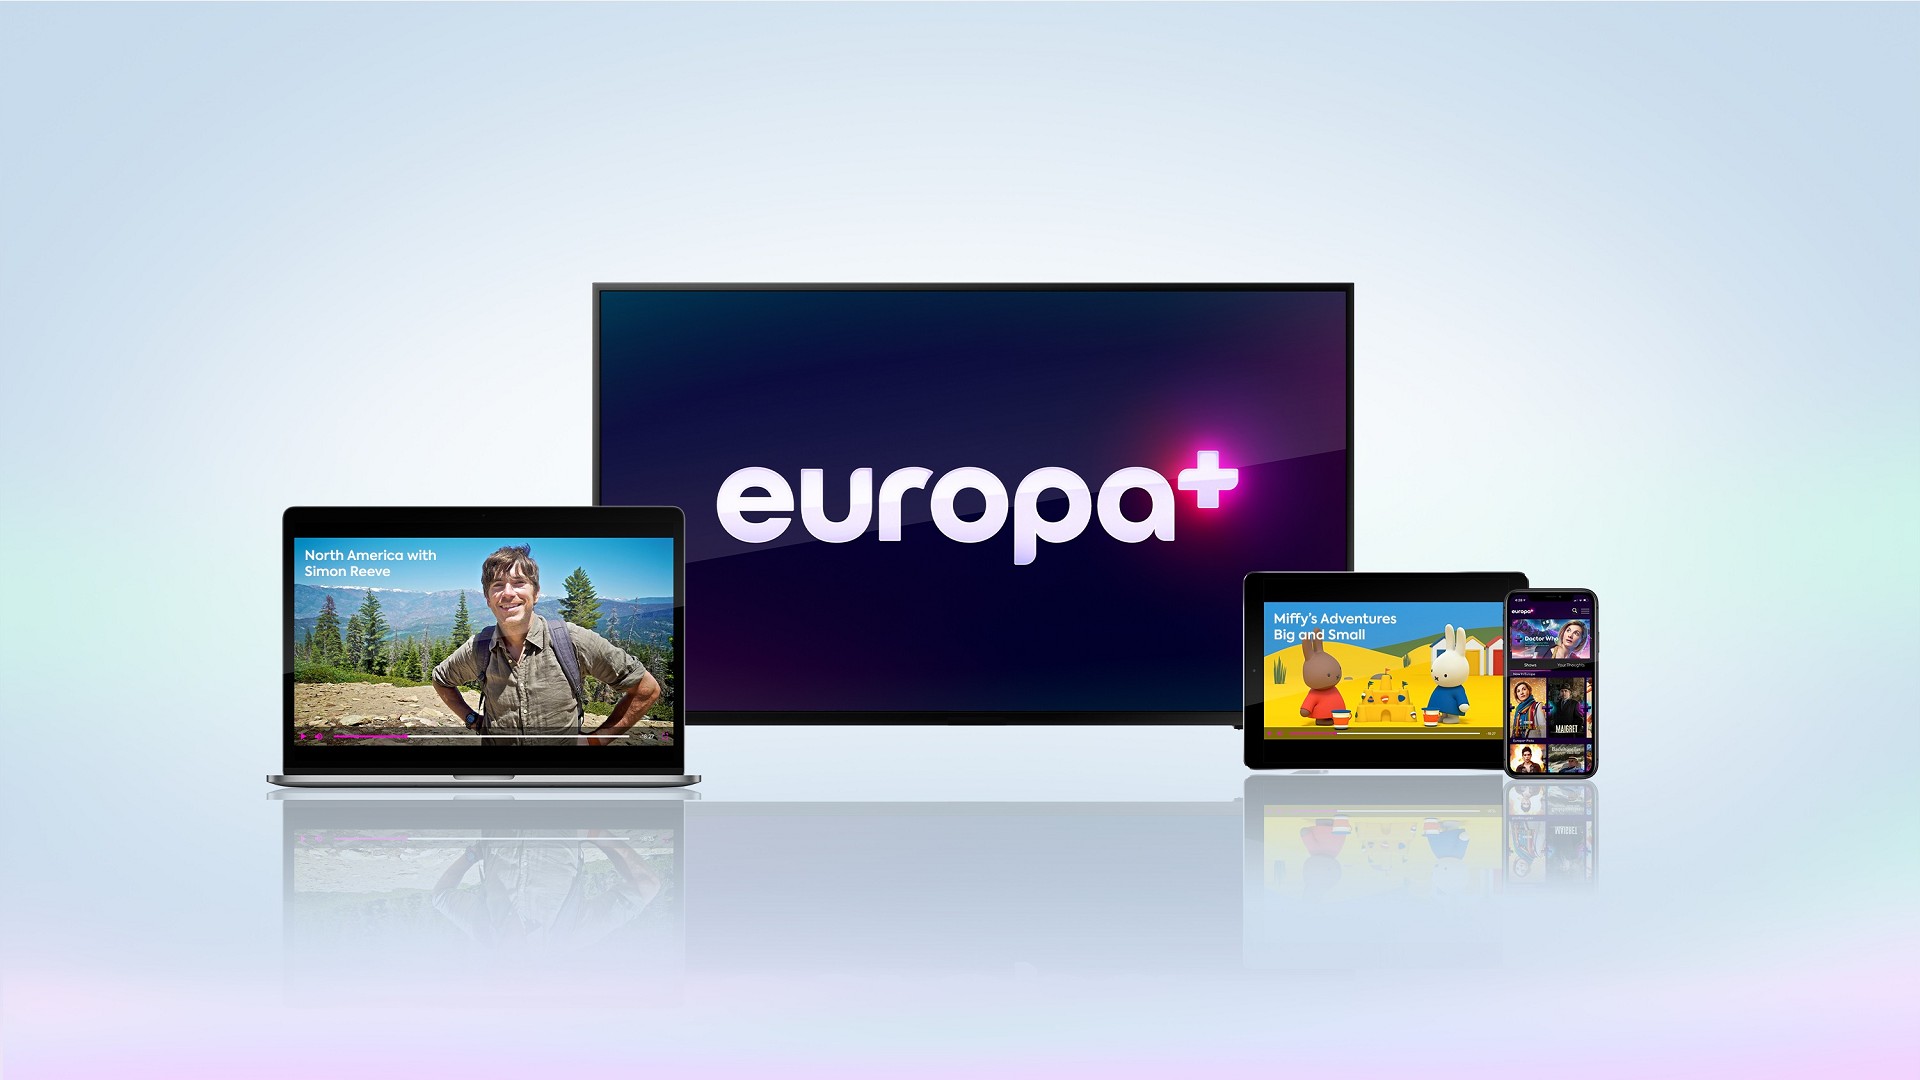 New streaming! Europa+ debuts in the Brazilian market in partnership with Claro